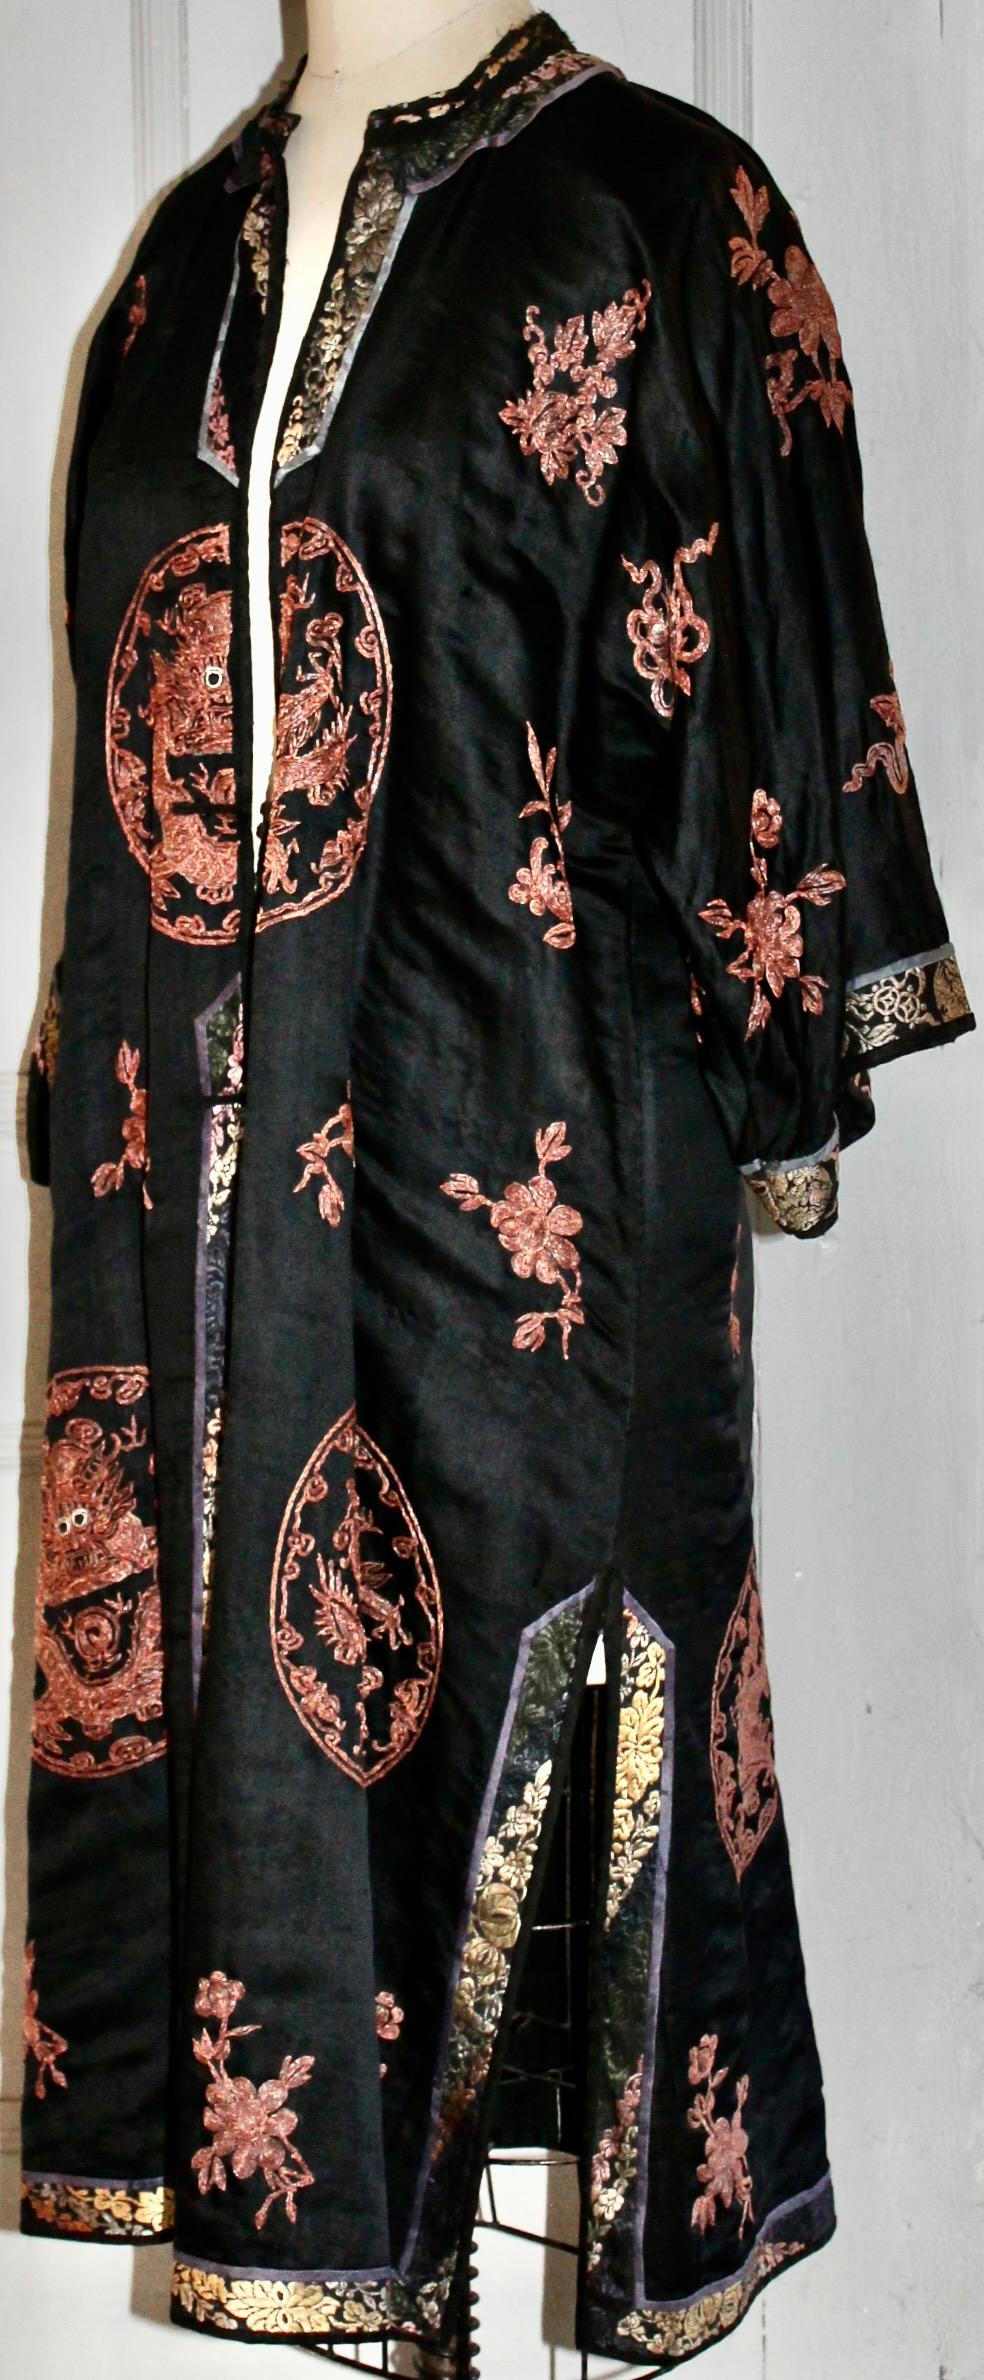 Early 20th Century Chinese Robe with Metallic Dragon Embroidery For Sale 1